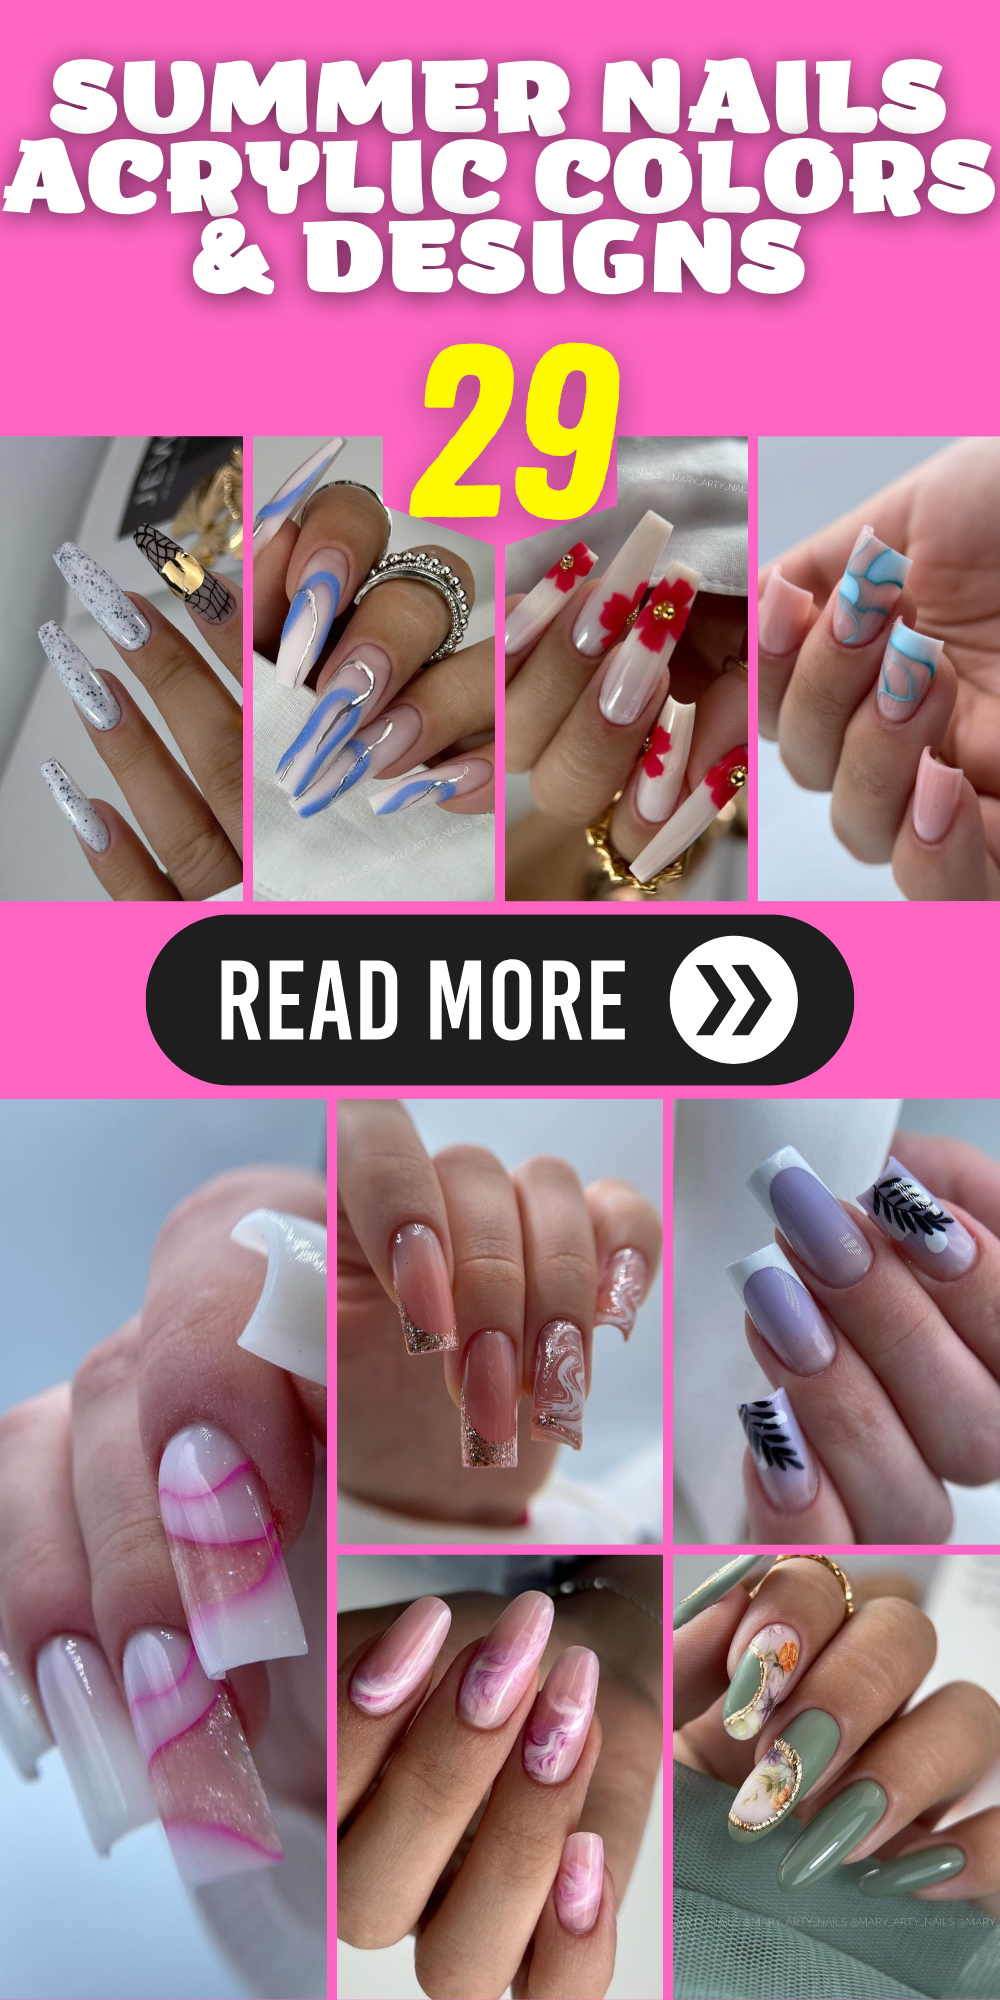 Vibrant Trends: Acrylic Colors & Designs for Summer Nails